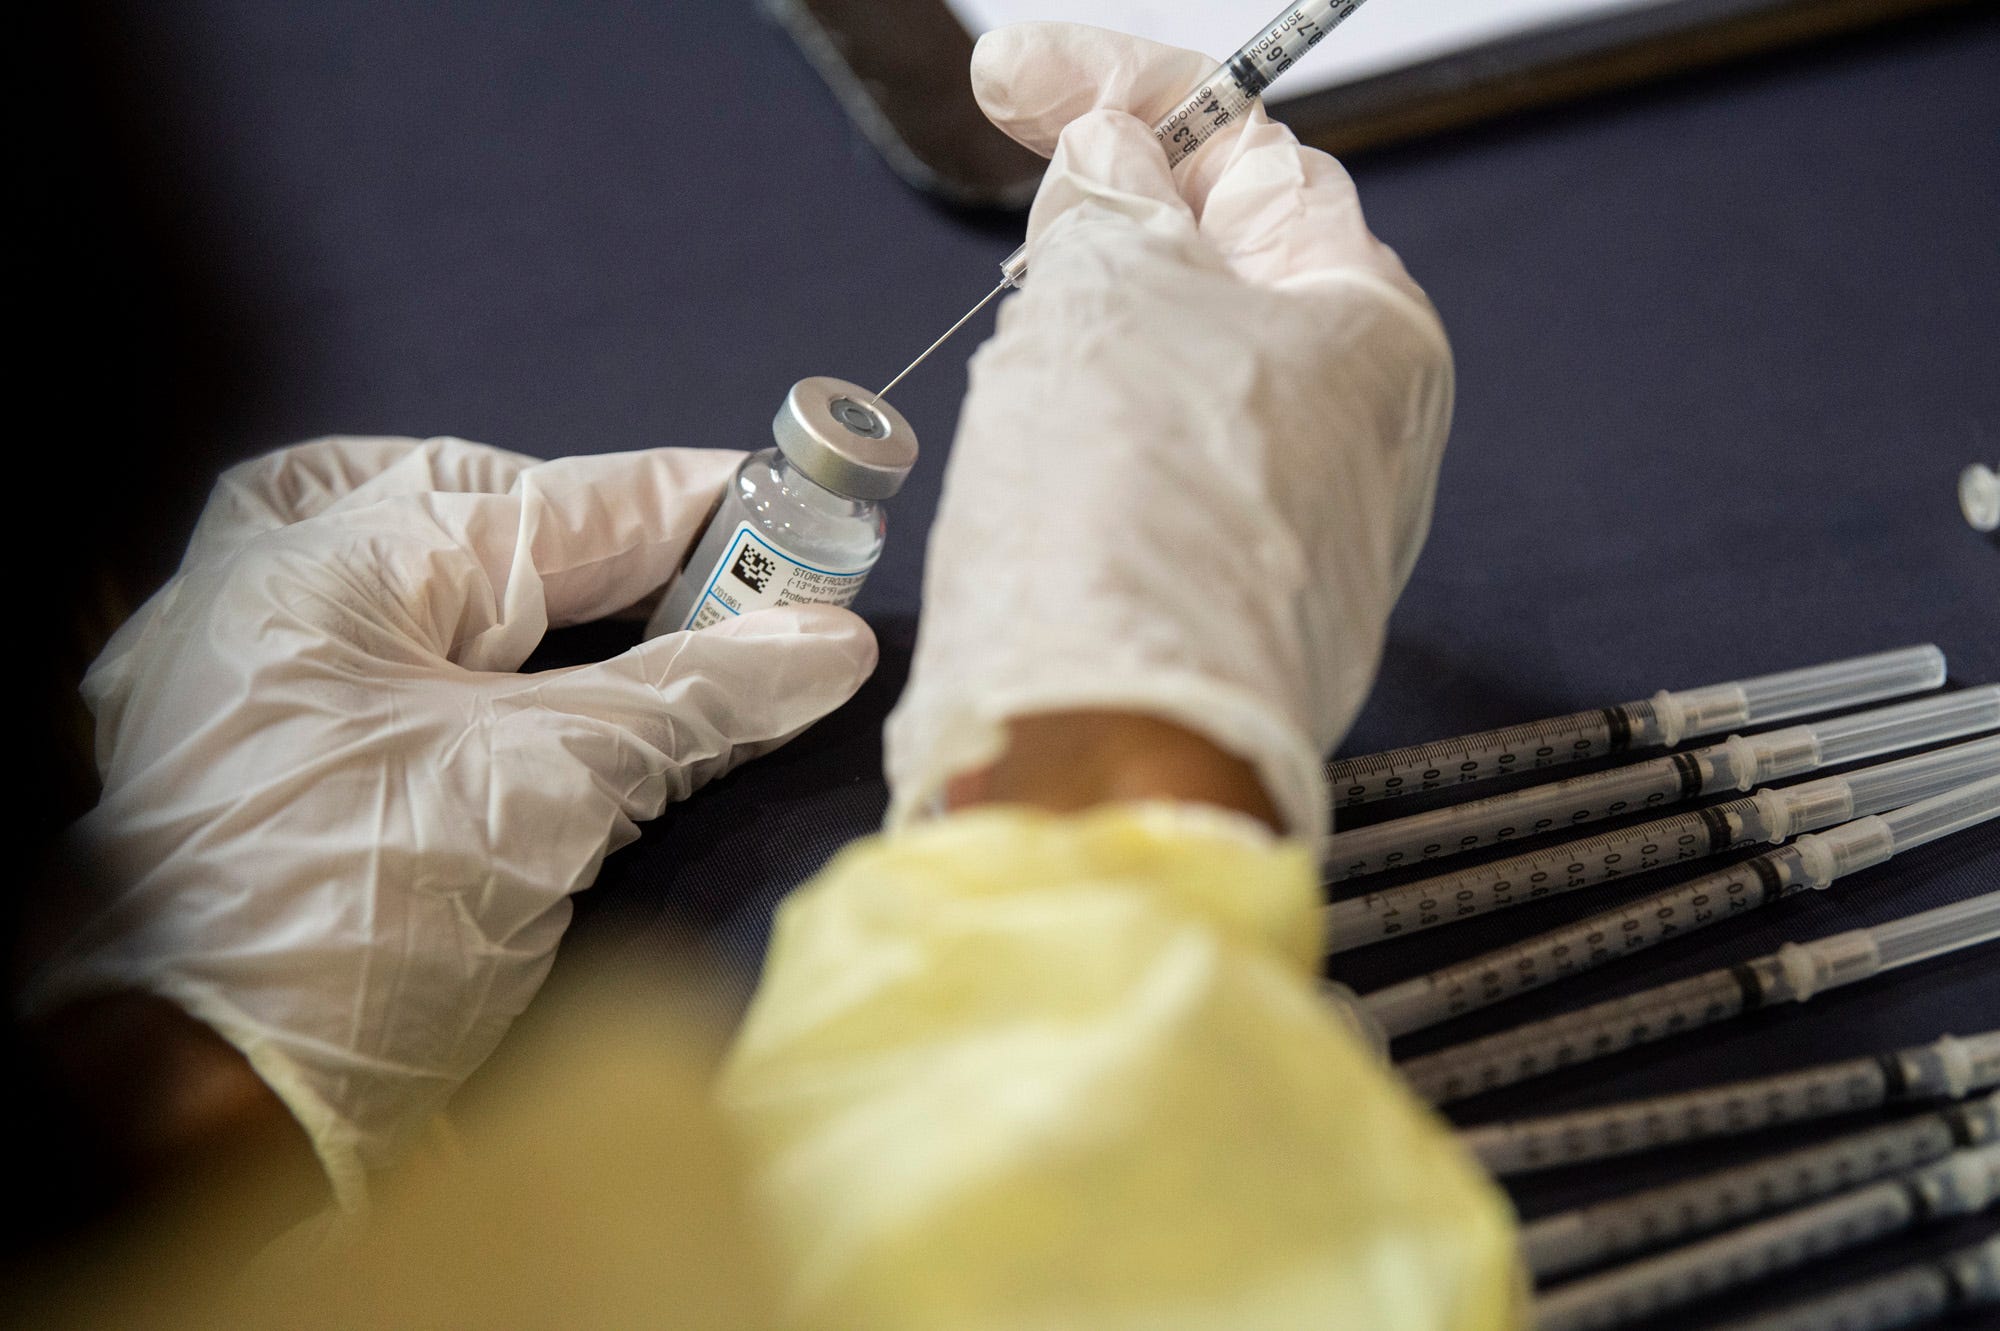 PHOTO: Moderna COVID-19 vaccine is load into needles at the COVID-19 vaccine clinic at Alabama State University in Montgomery, Ala., Feb. 22, 2021.